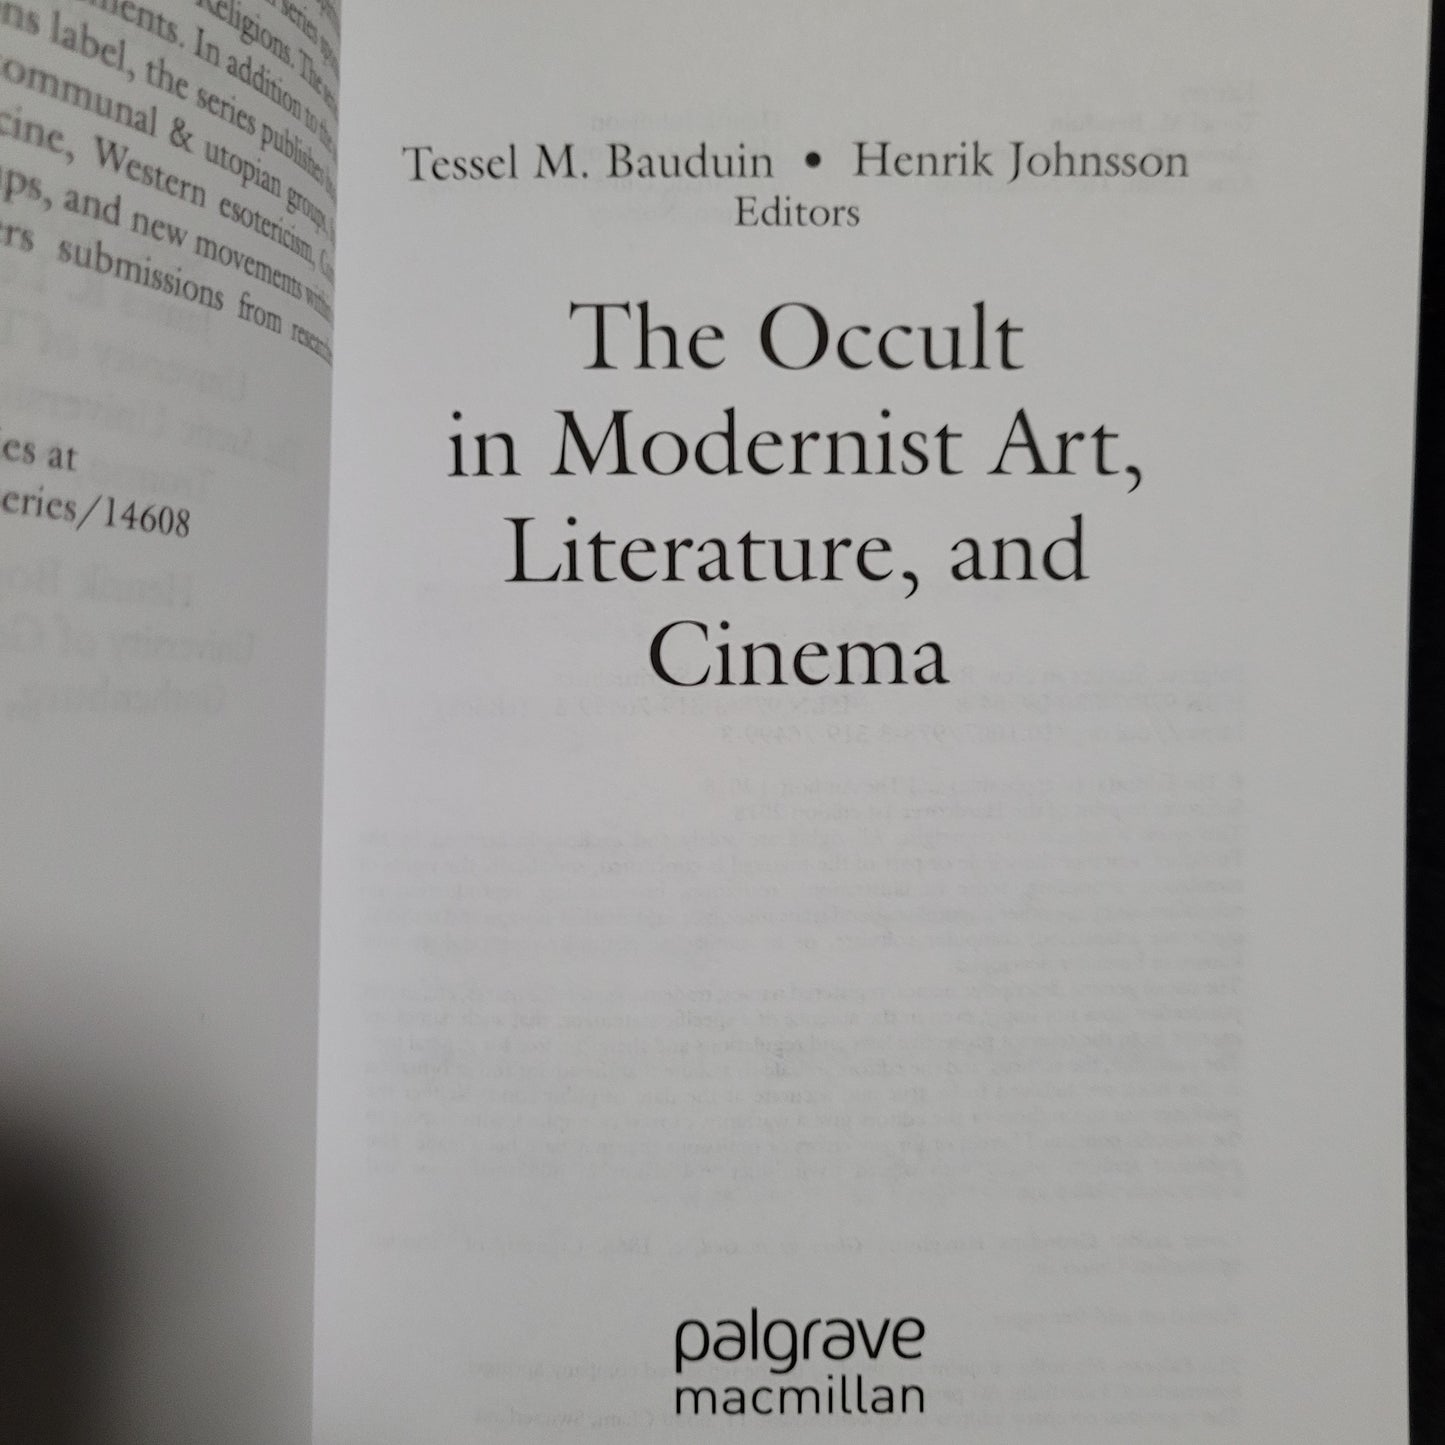 The Occult in Modernist Art, Literature, and Cinema edited by Tessel M. Bauduin and Henrik Johnsson (Palgrave Macmillan, 2018) Paperback Edition